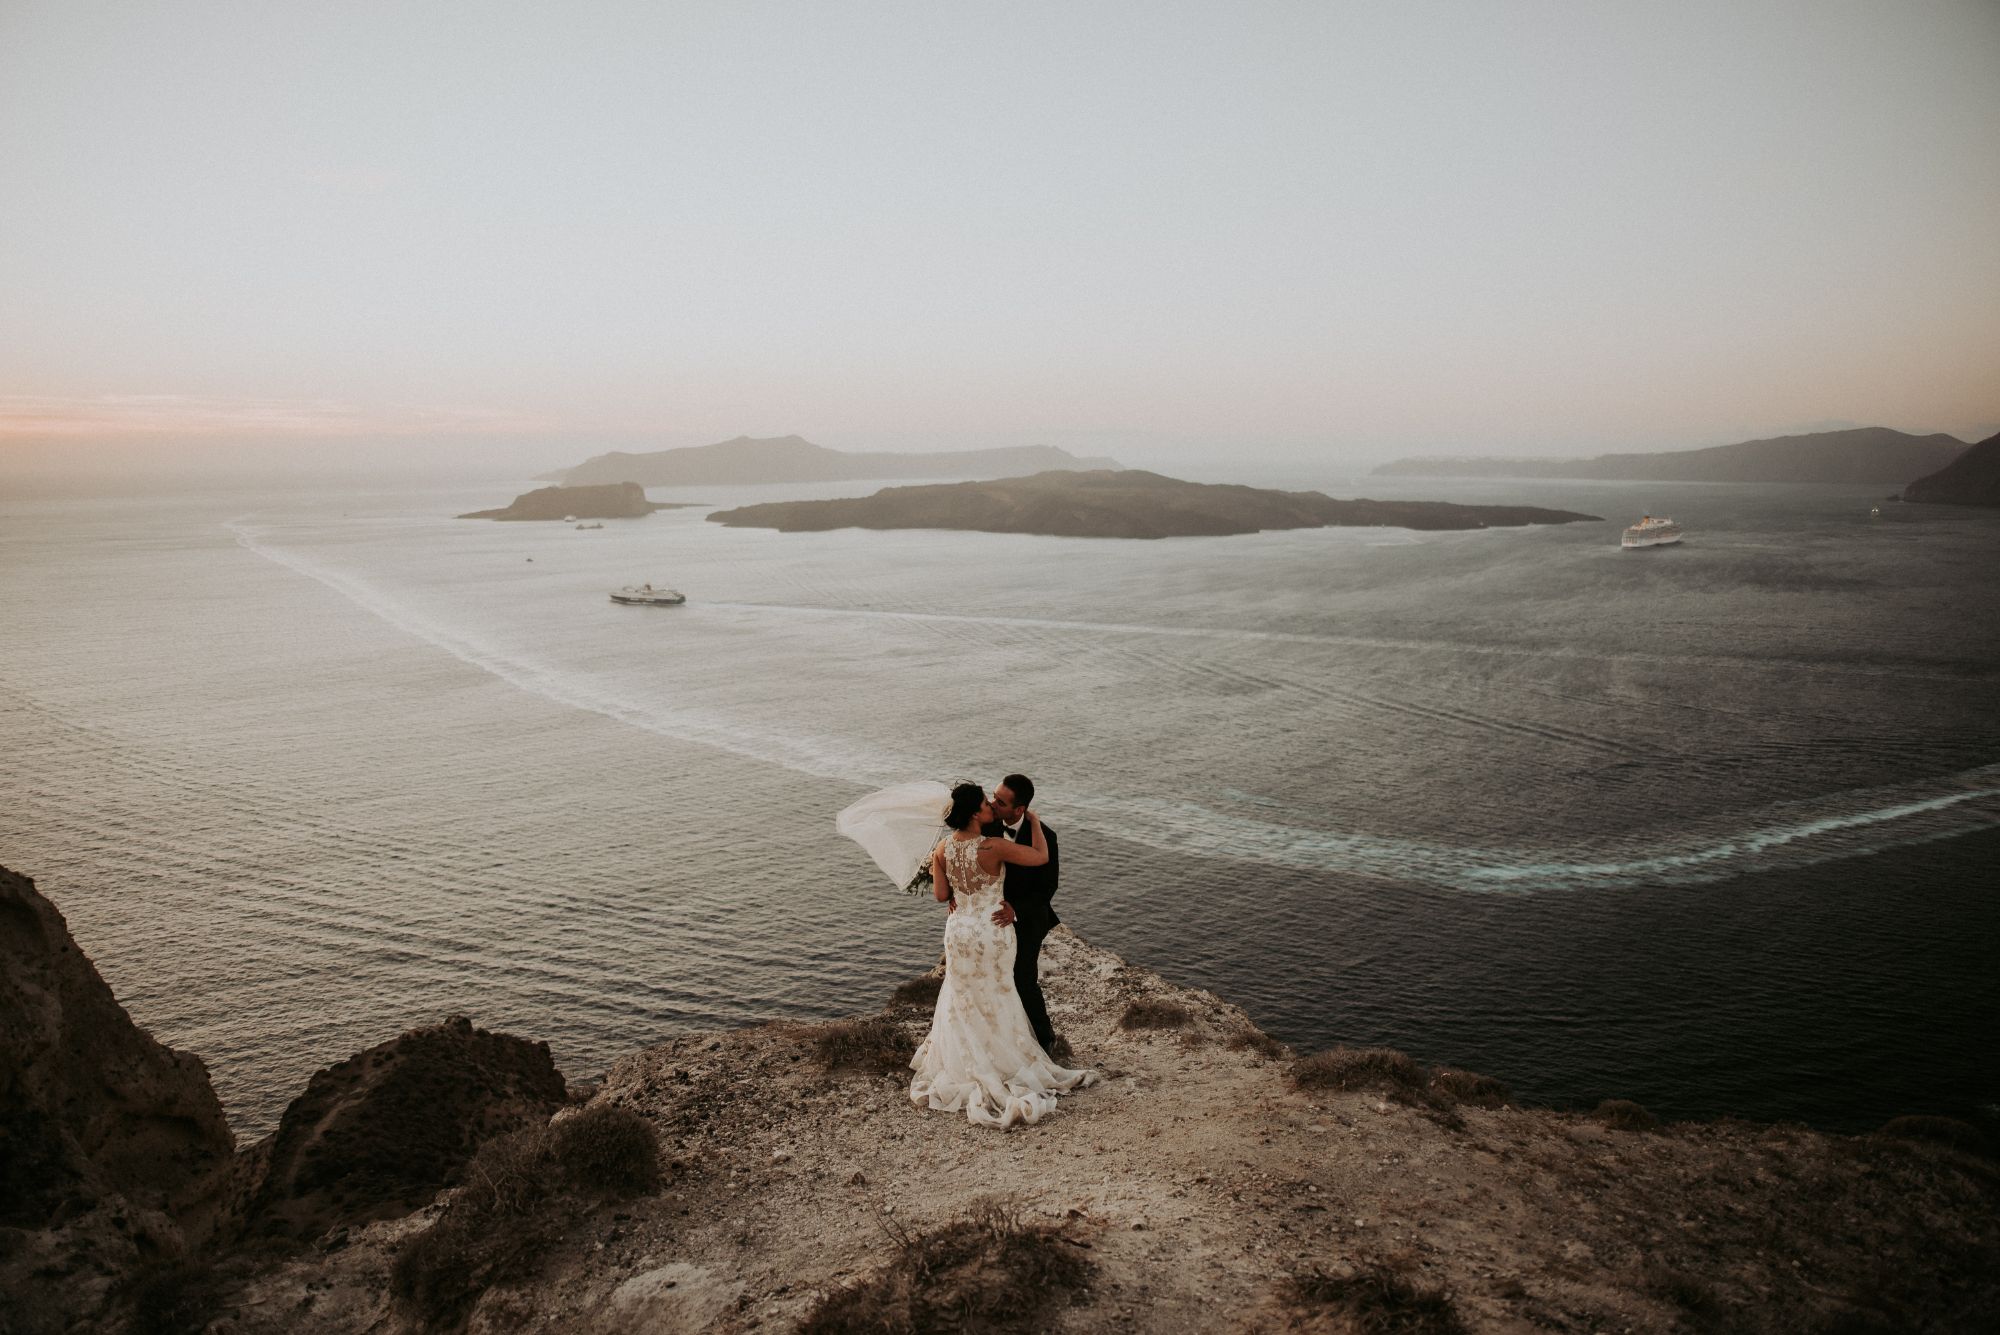 Newlywed couple at cliff's edge overlooking sea.